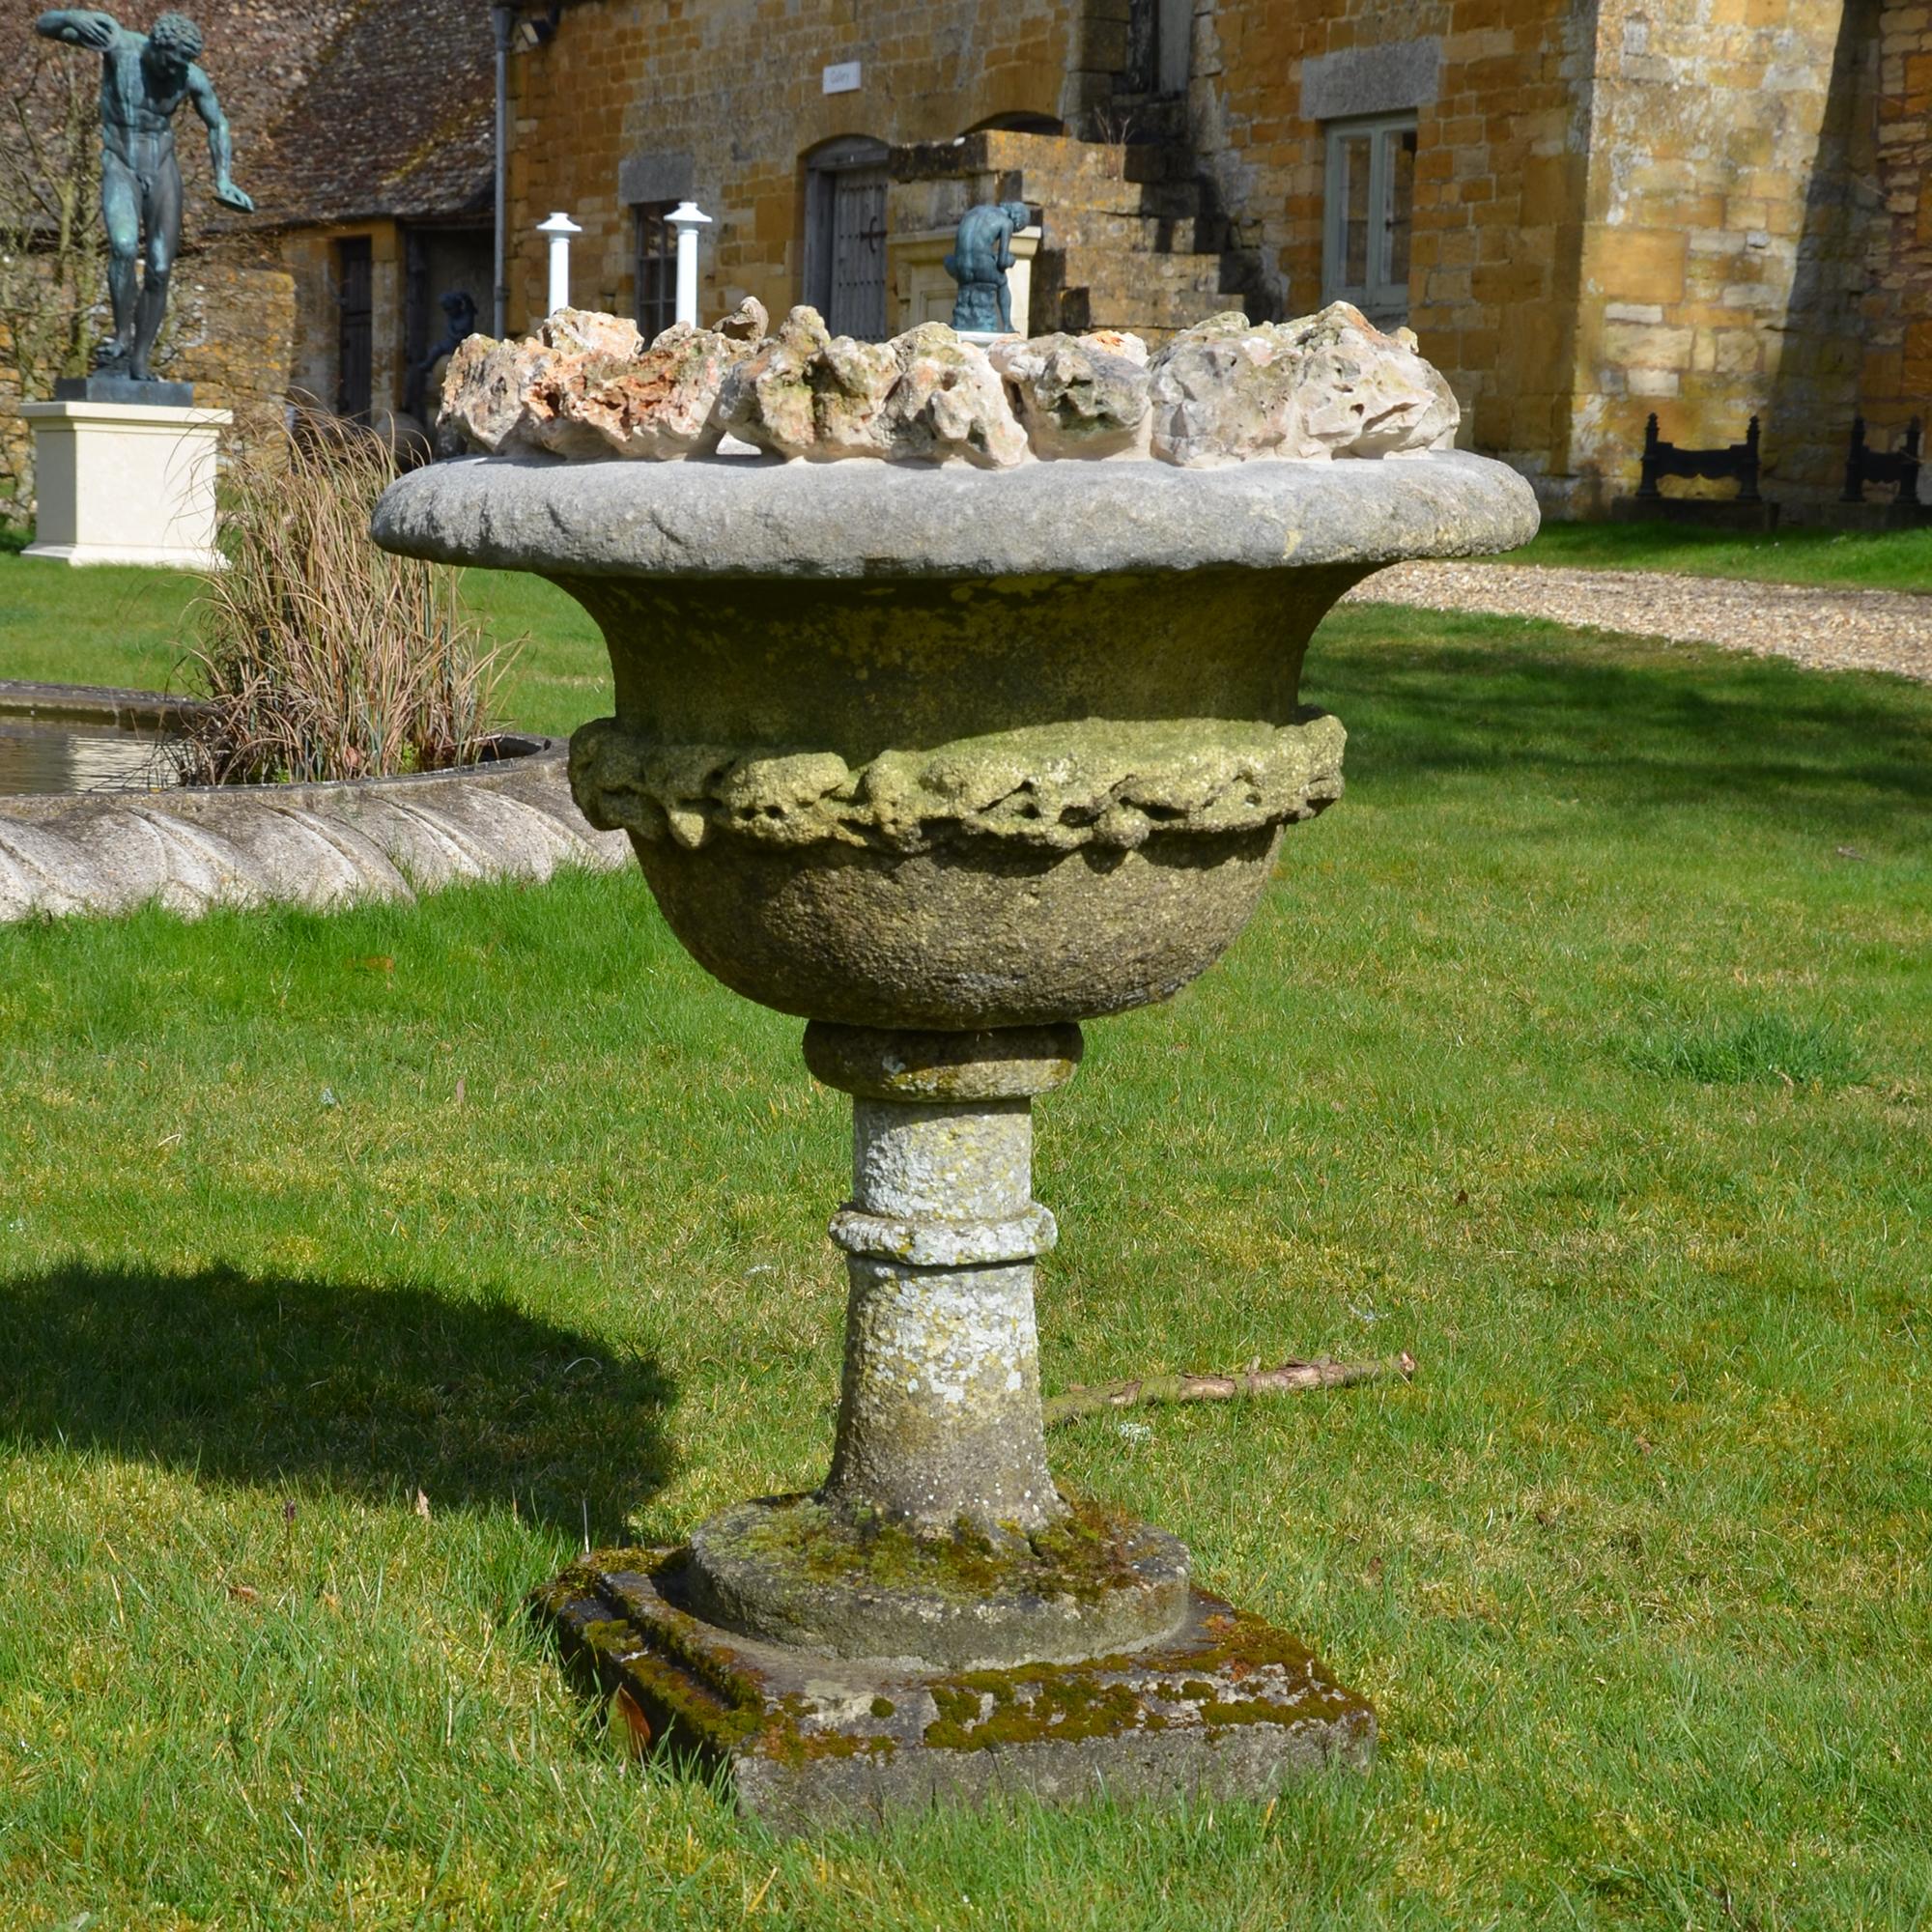 A late 19th century carved stone urn of campana form having a foliate decorative band and later additional grotto stone decoration to the top rim, raised on an extended socle base.